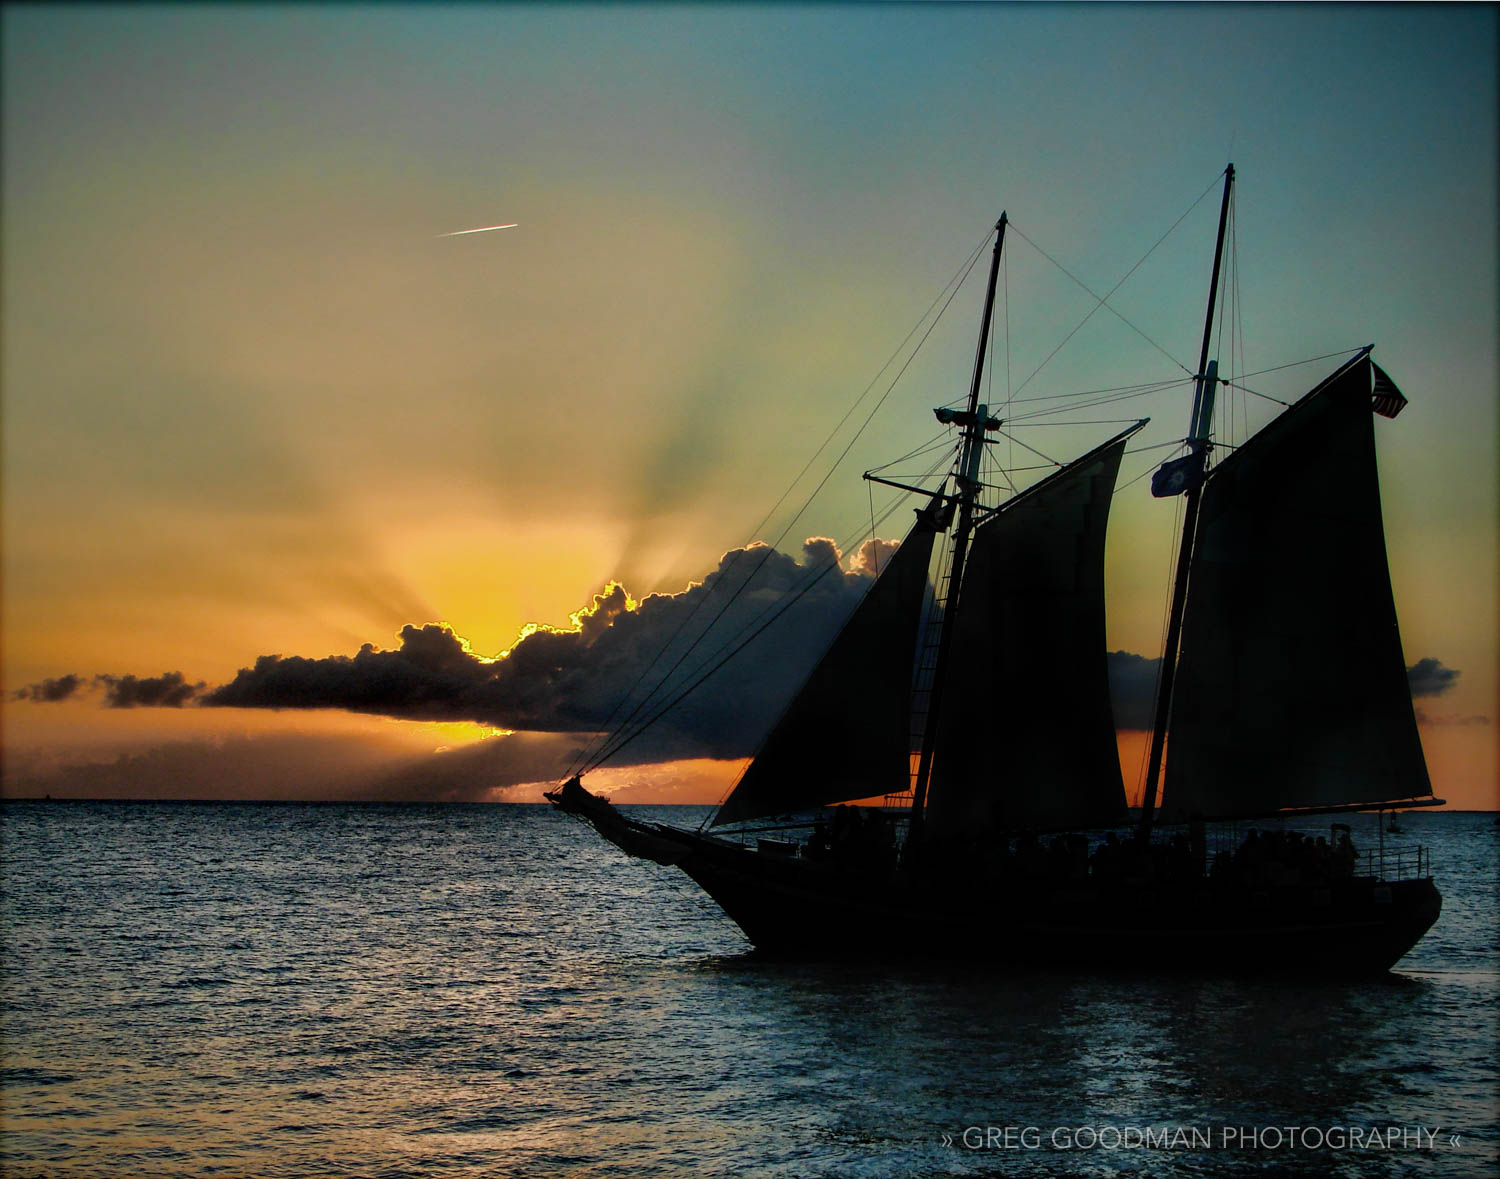 Pirate ships double as sunset cruise boats in Key West, Florida